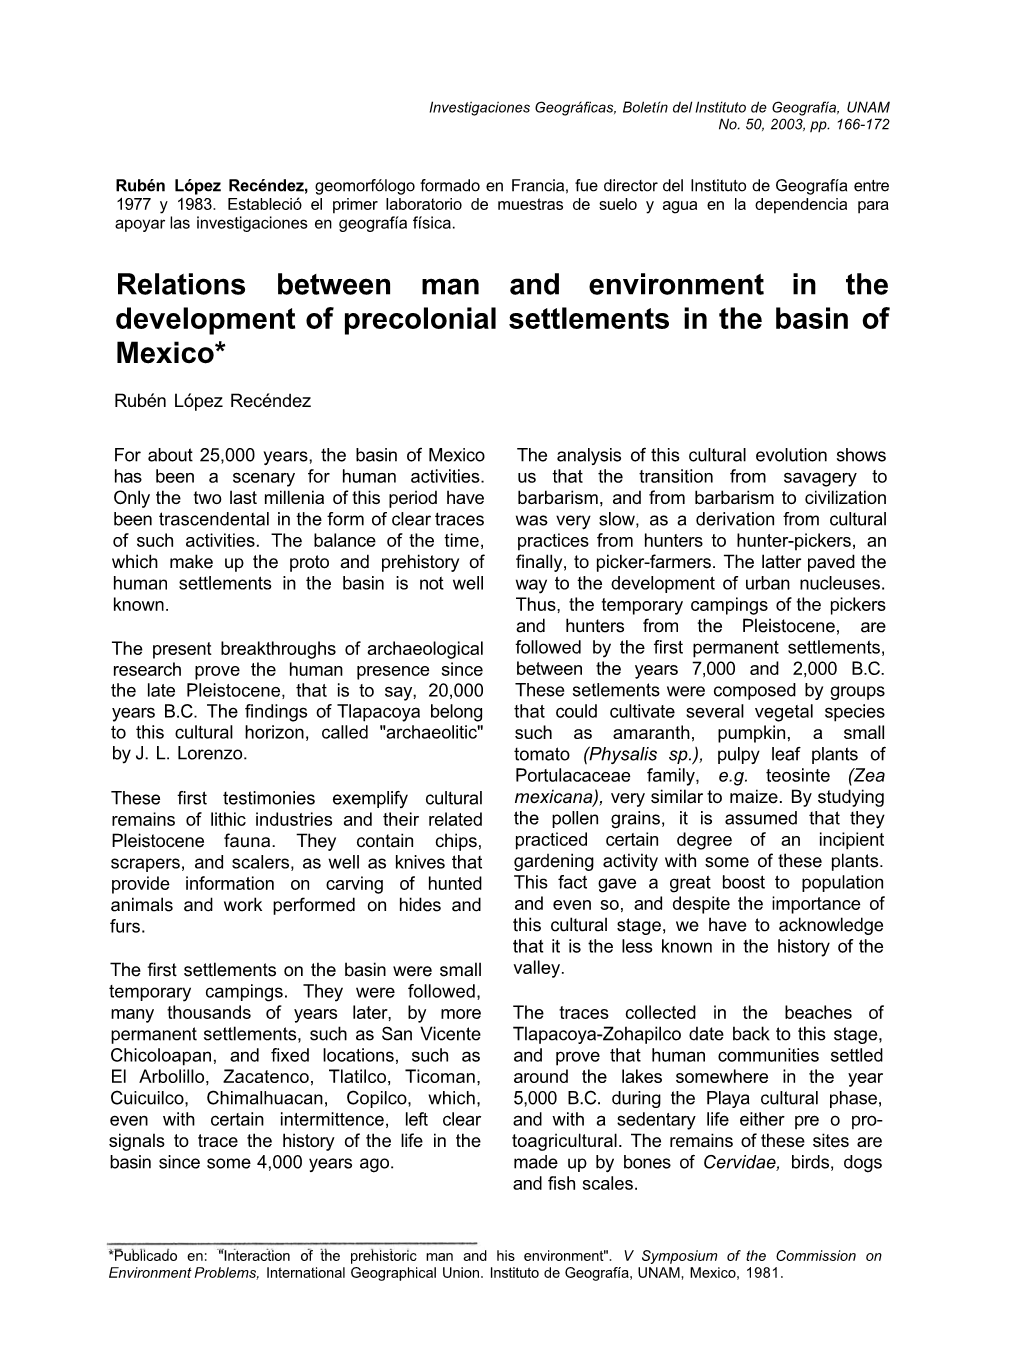 Relations Between Man and Environment in the Development of Precolonial Settlements in the Basin of Mexico*